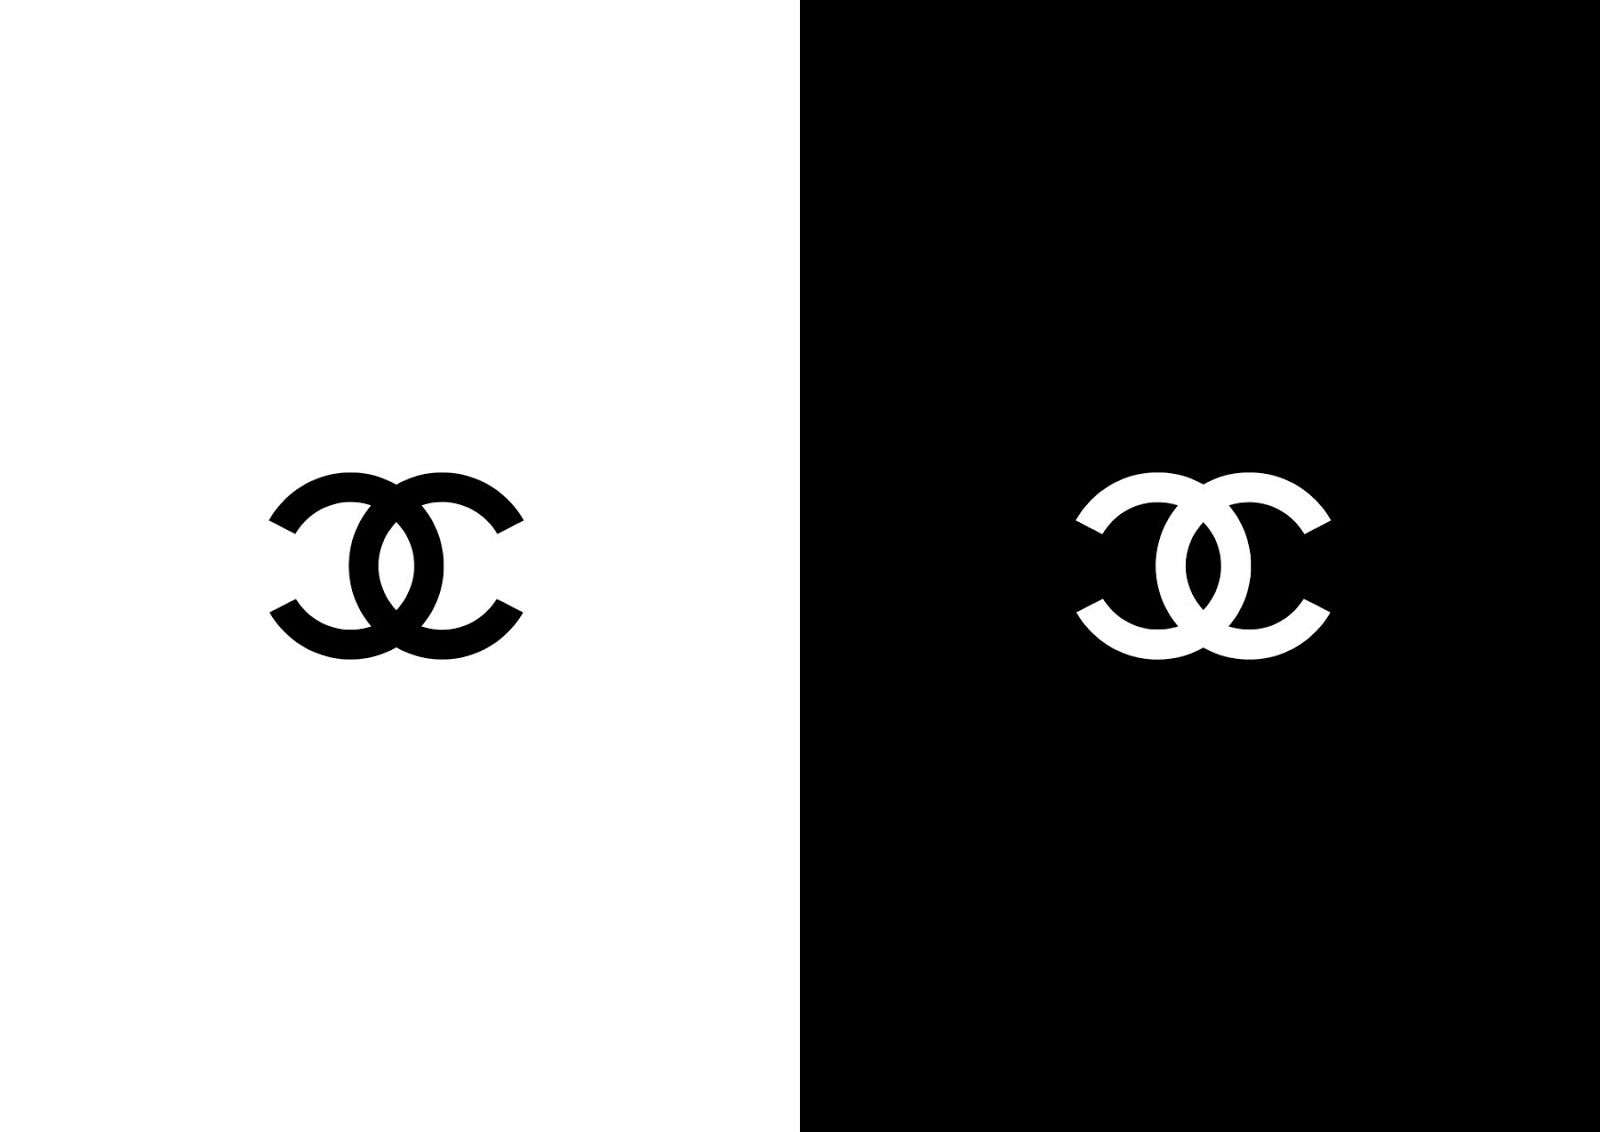 Chanel Backgrounds Sf Wallpaper